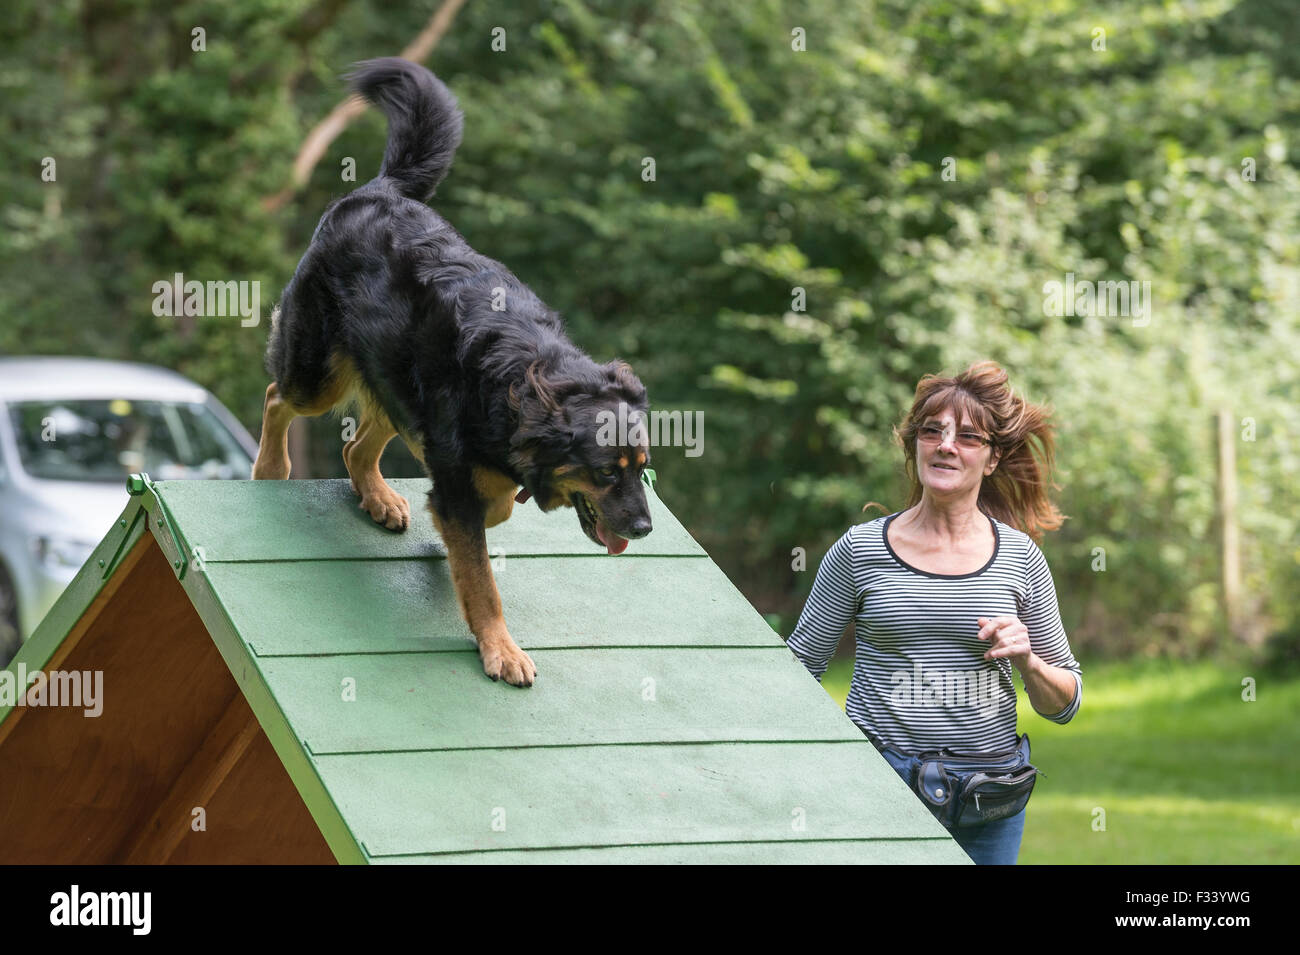 A mixed breed dog completing the A-Frame obstacle during agility training. Stock Photo